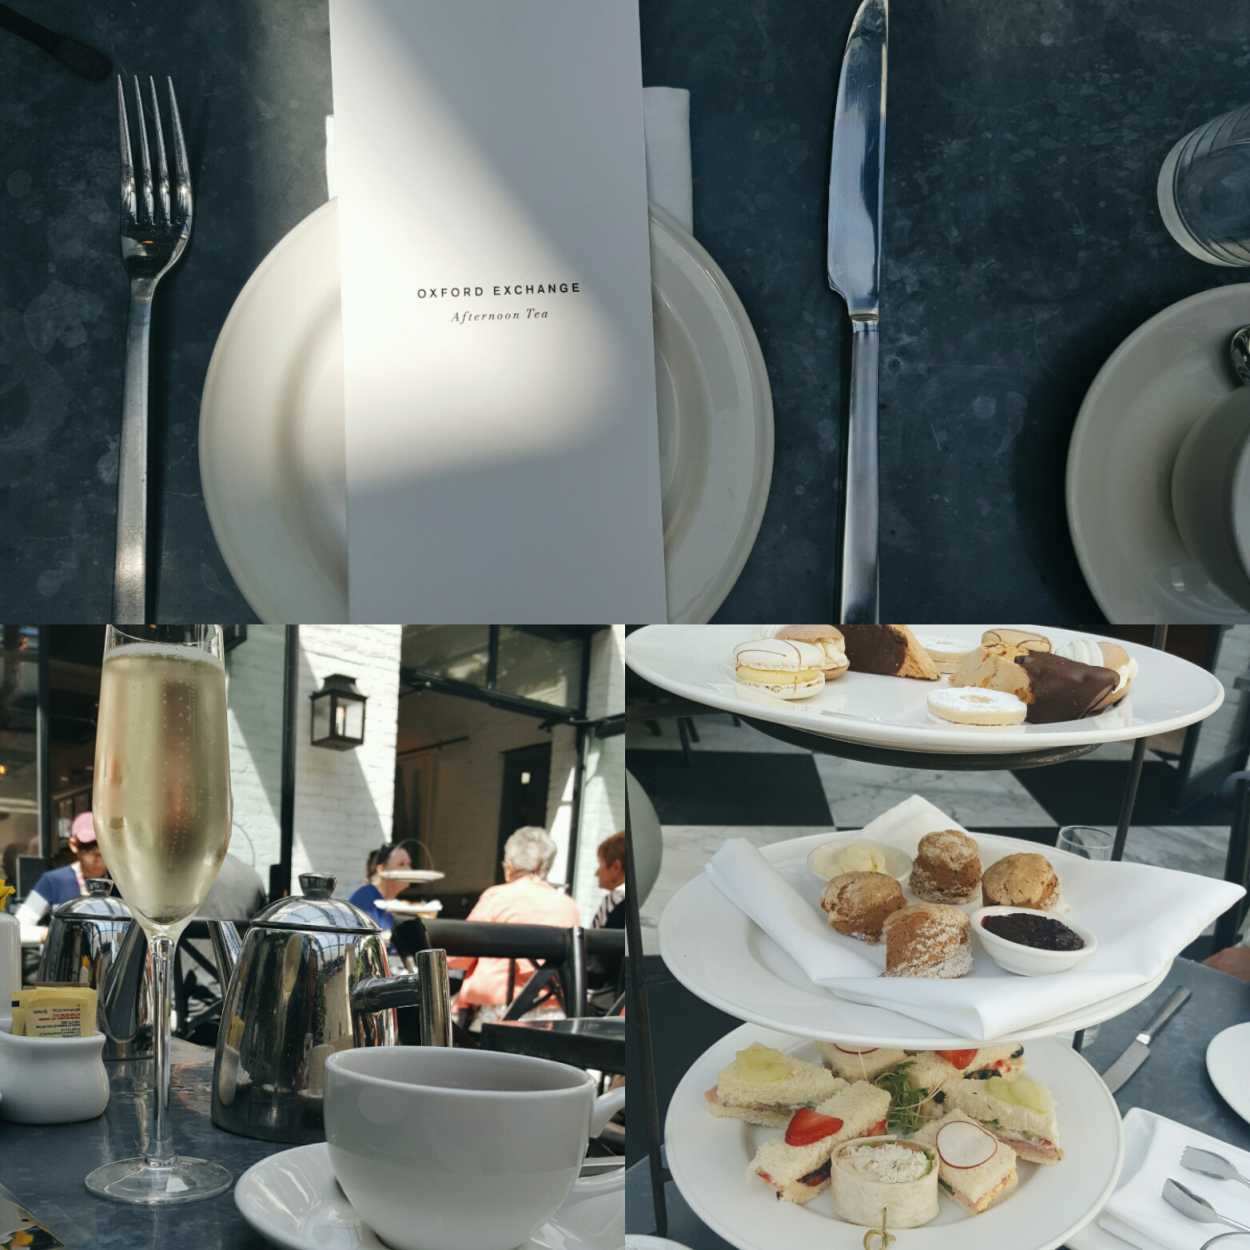 Collage of photos of afternoon tea service at Oxford Exchange in Tampa